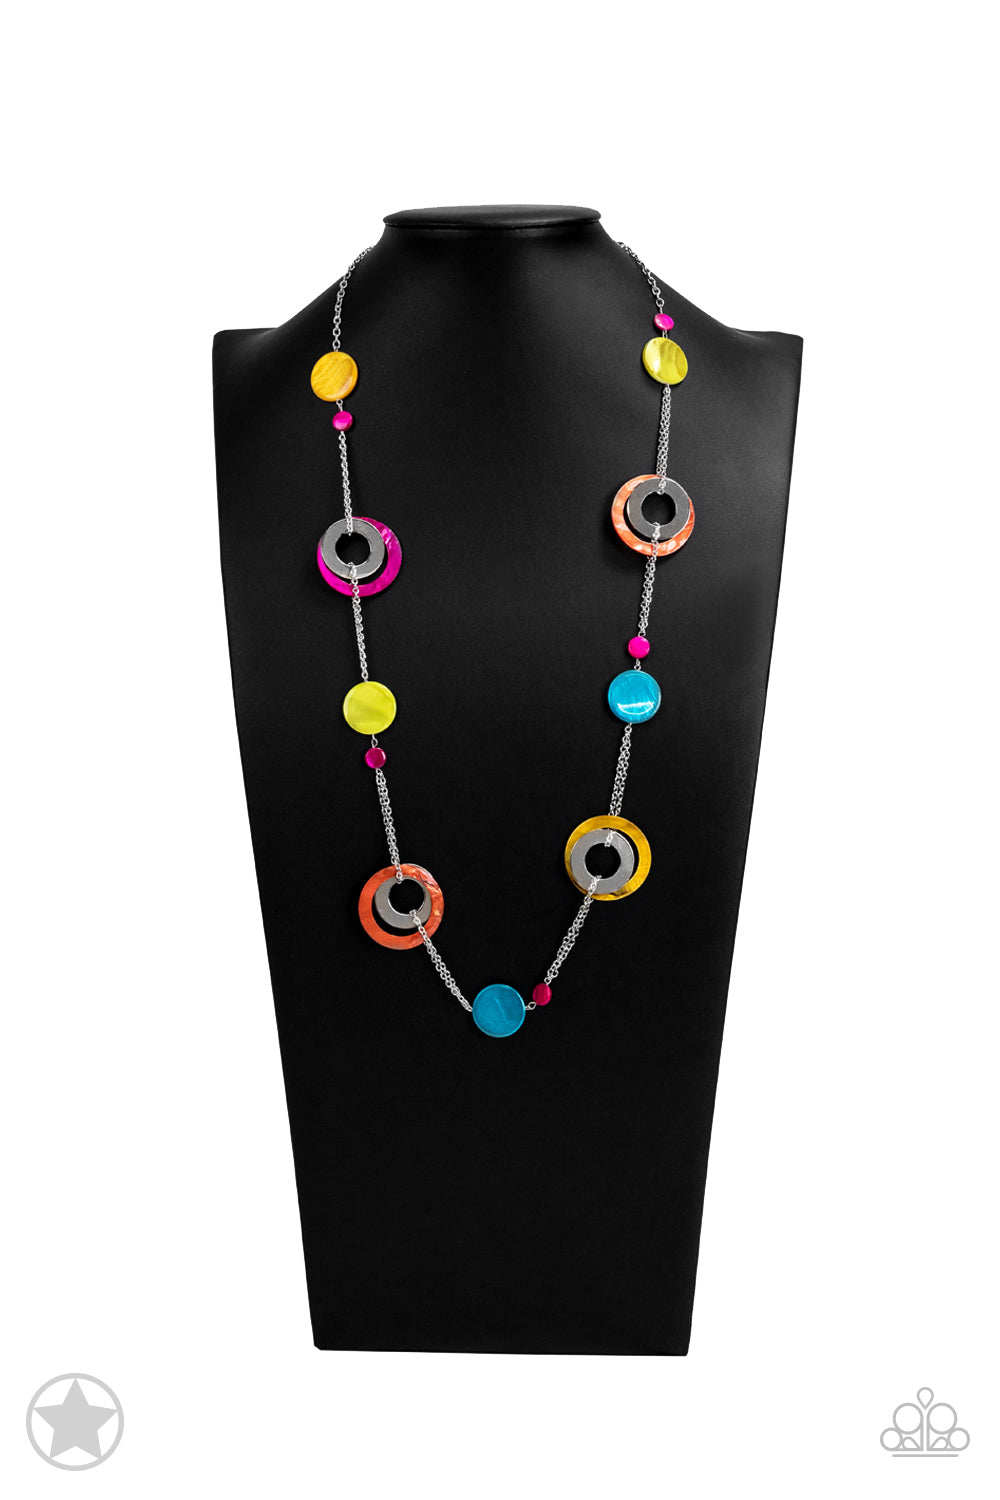 Kaleidoscopically Captivating Best Seller Paparazzi Accessories Necklace with Earrings